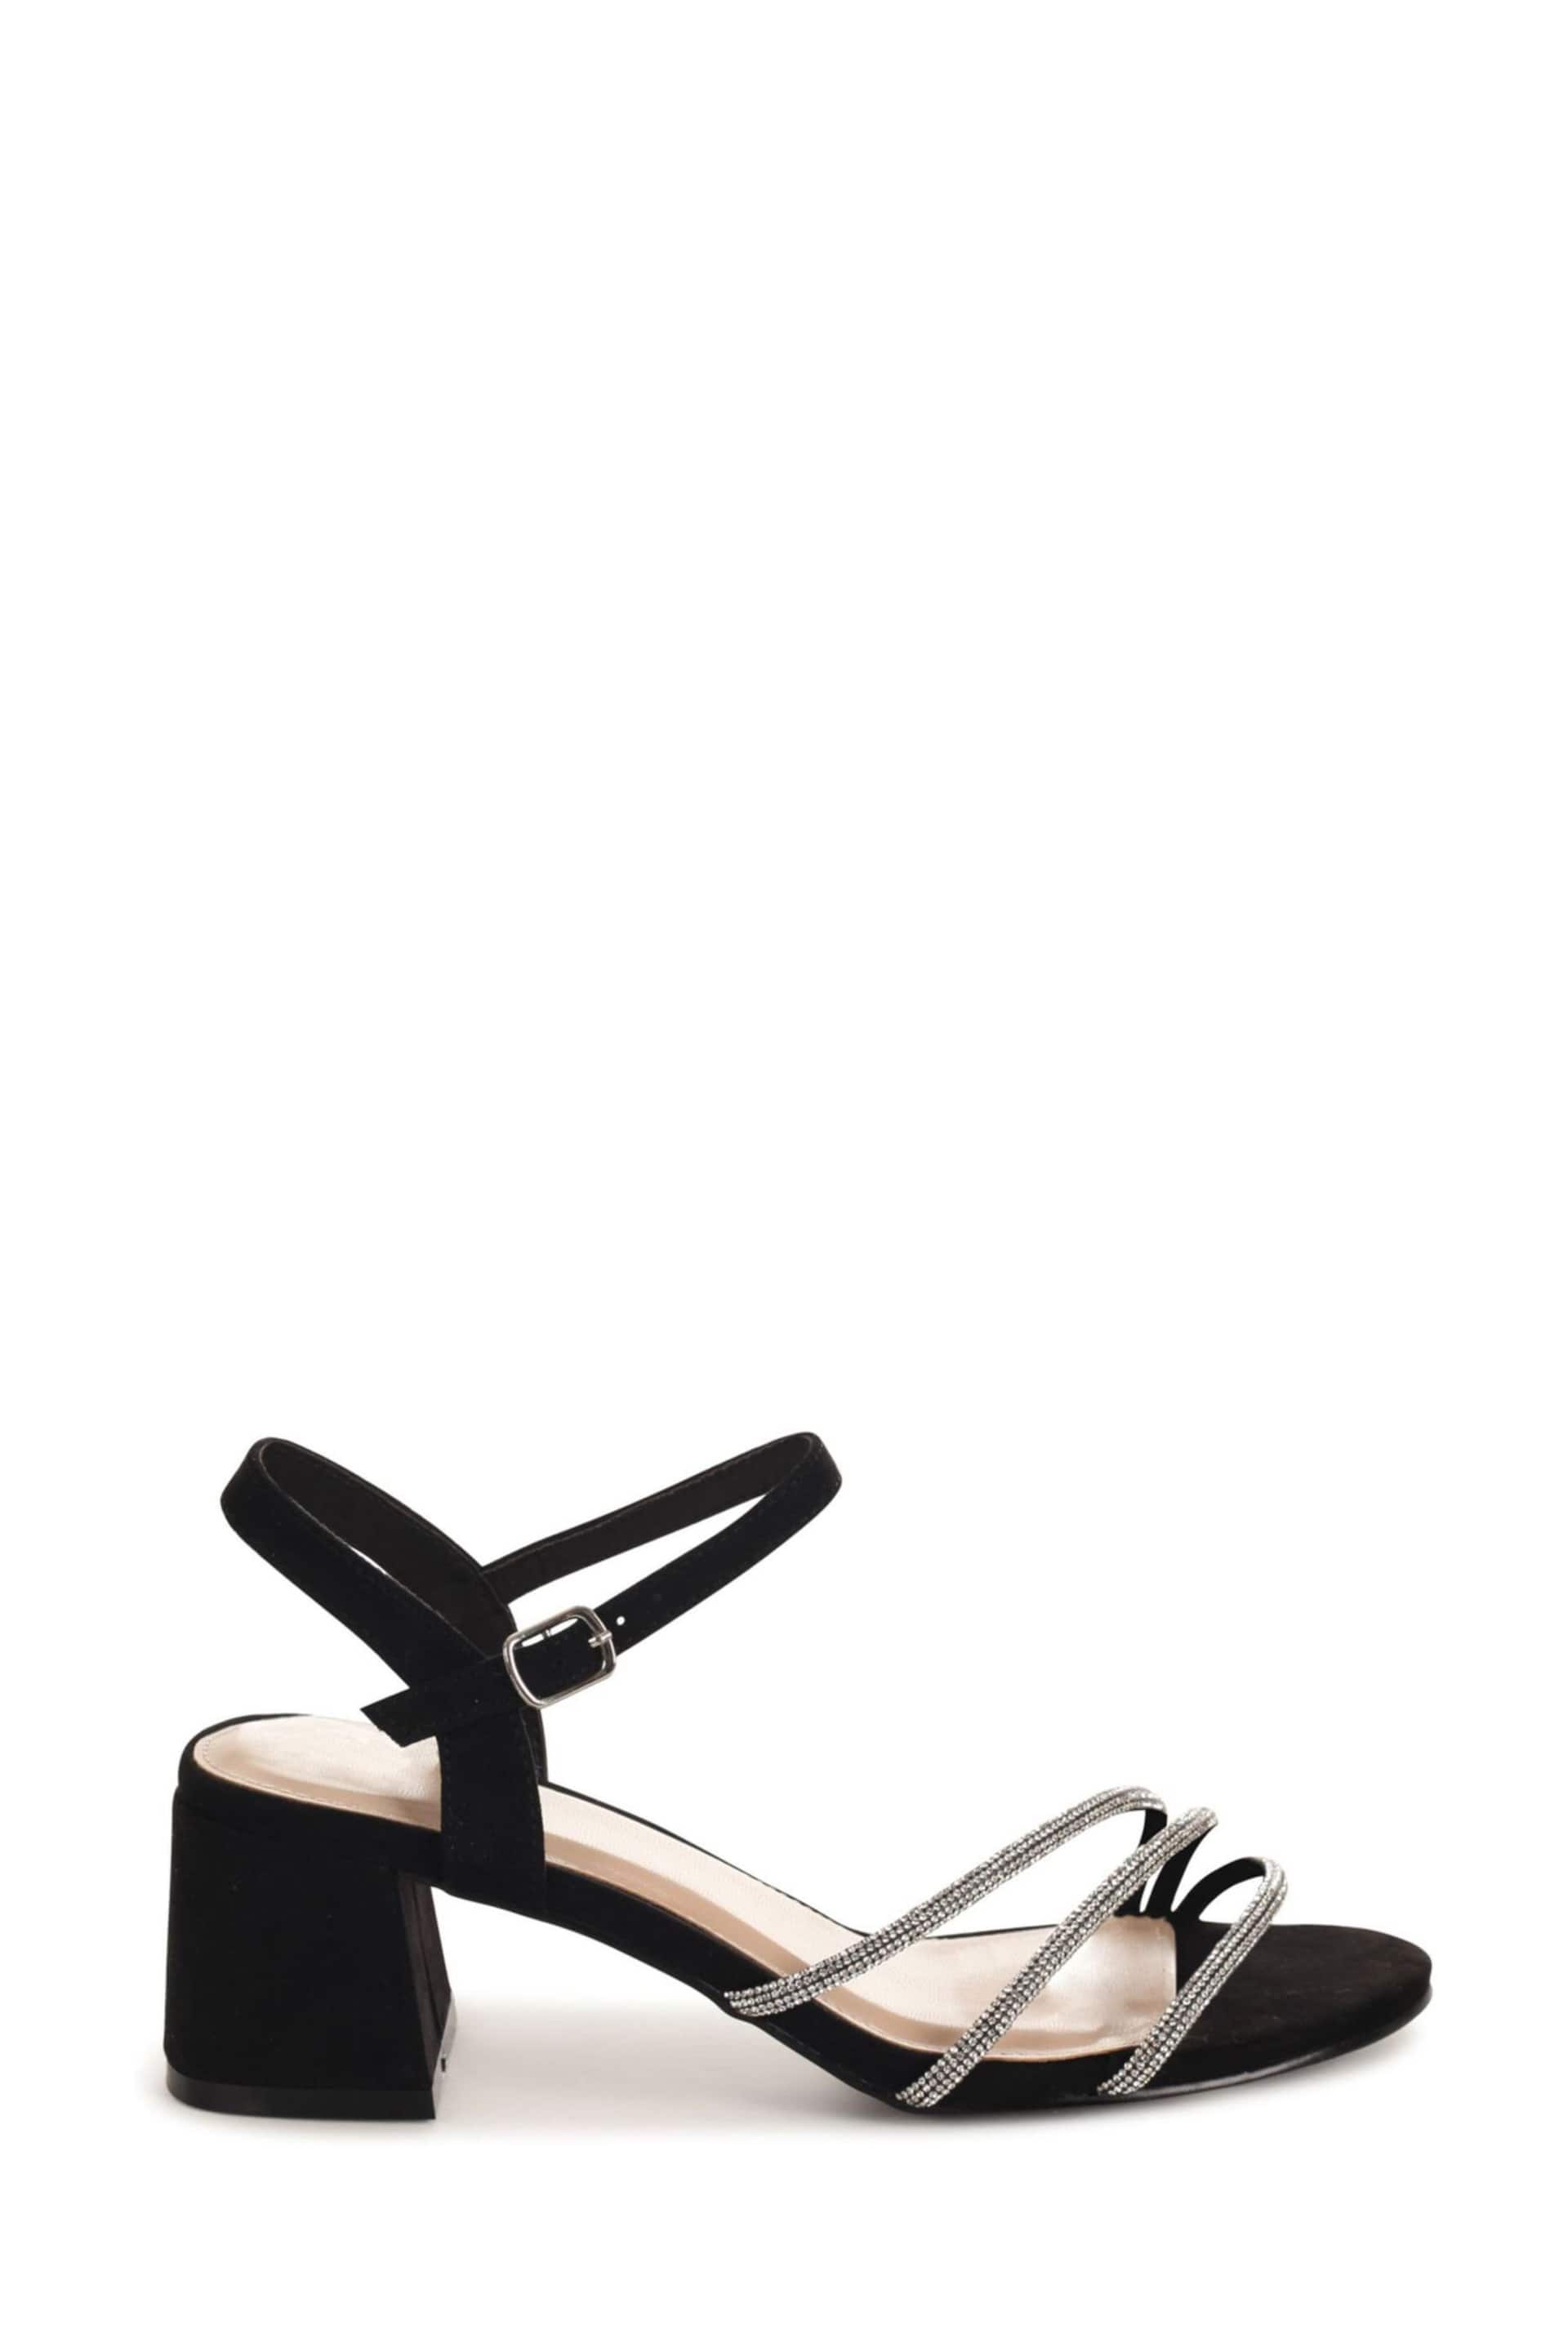 Linzi Black Carnation Low Block Heeled Sandal With Diamante Front Straps - Image 2 of 4